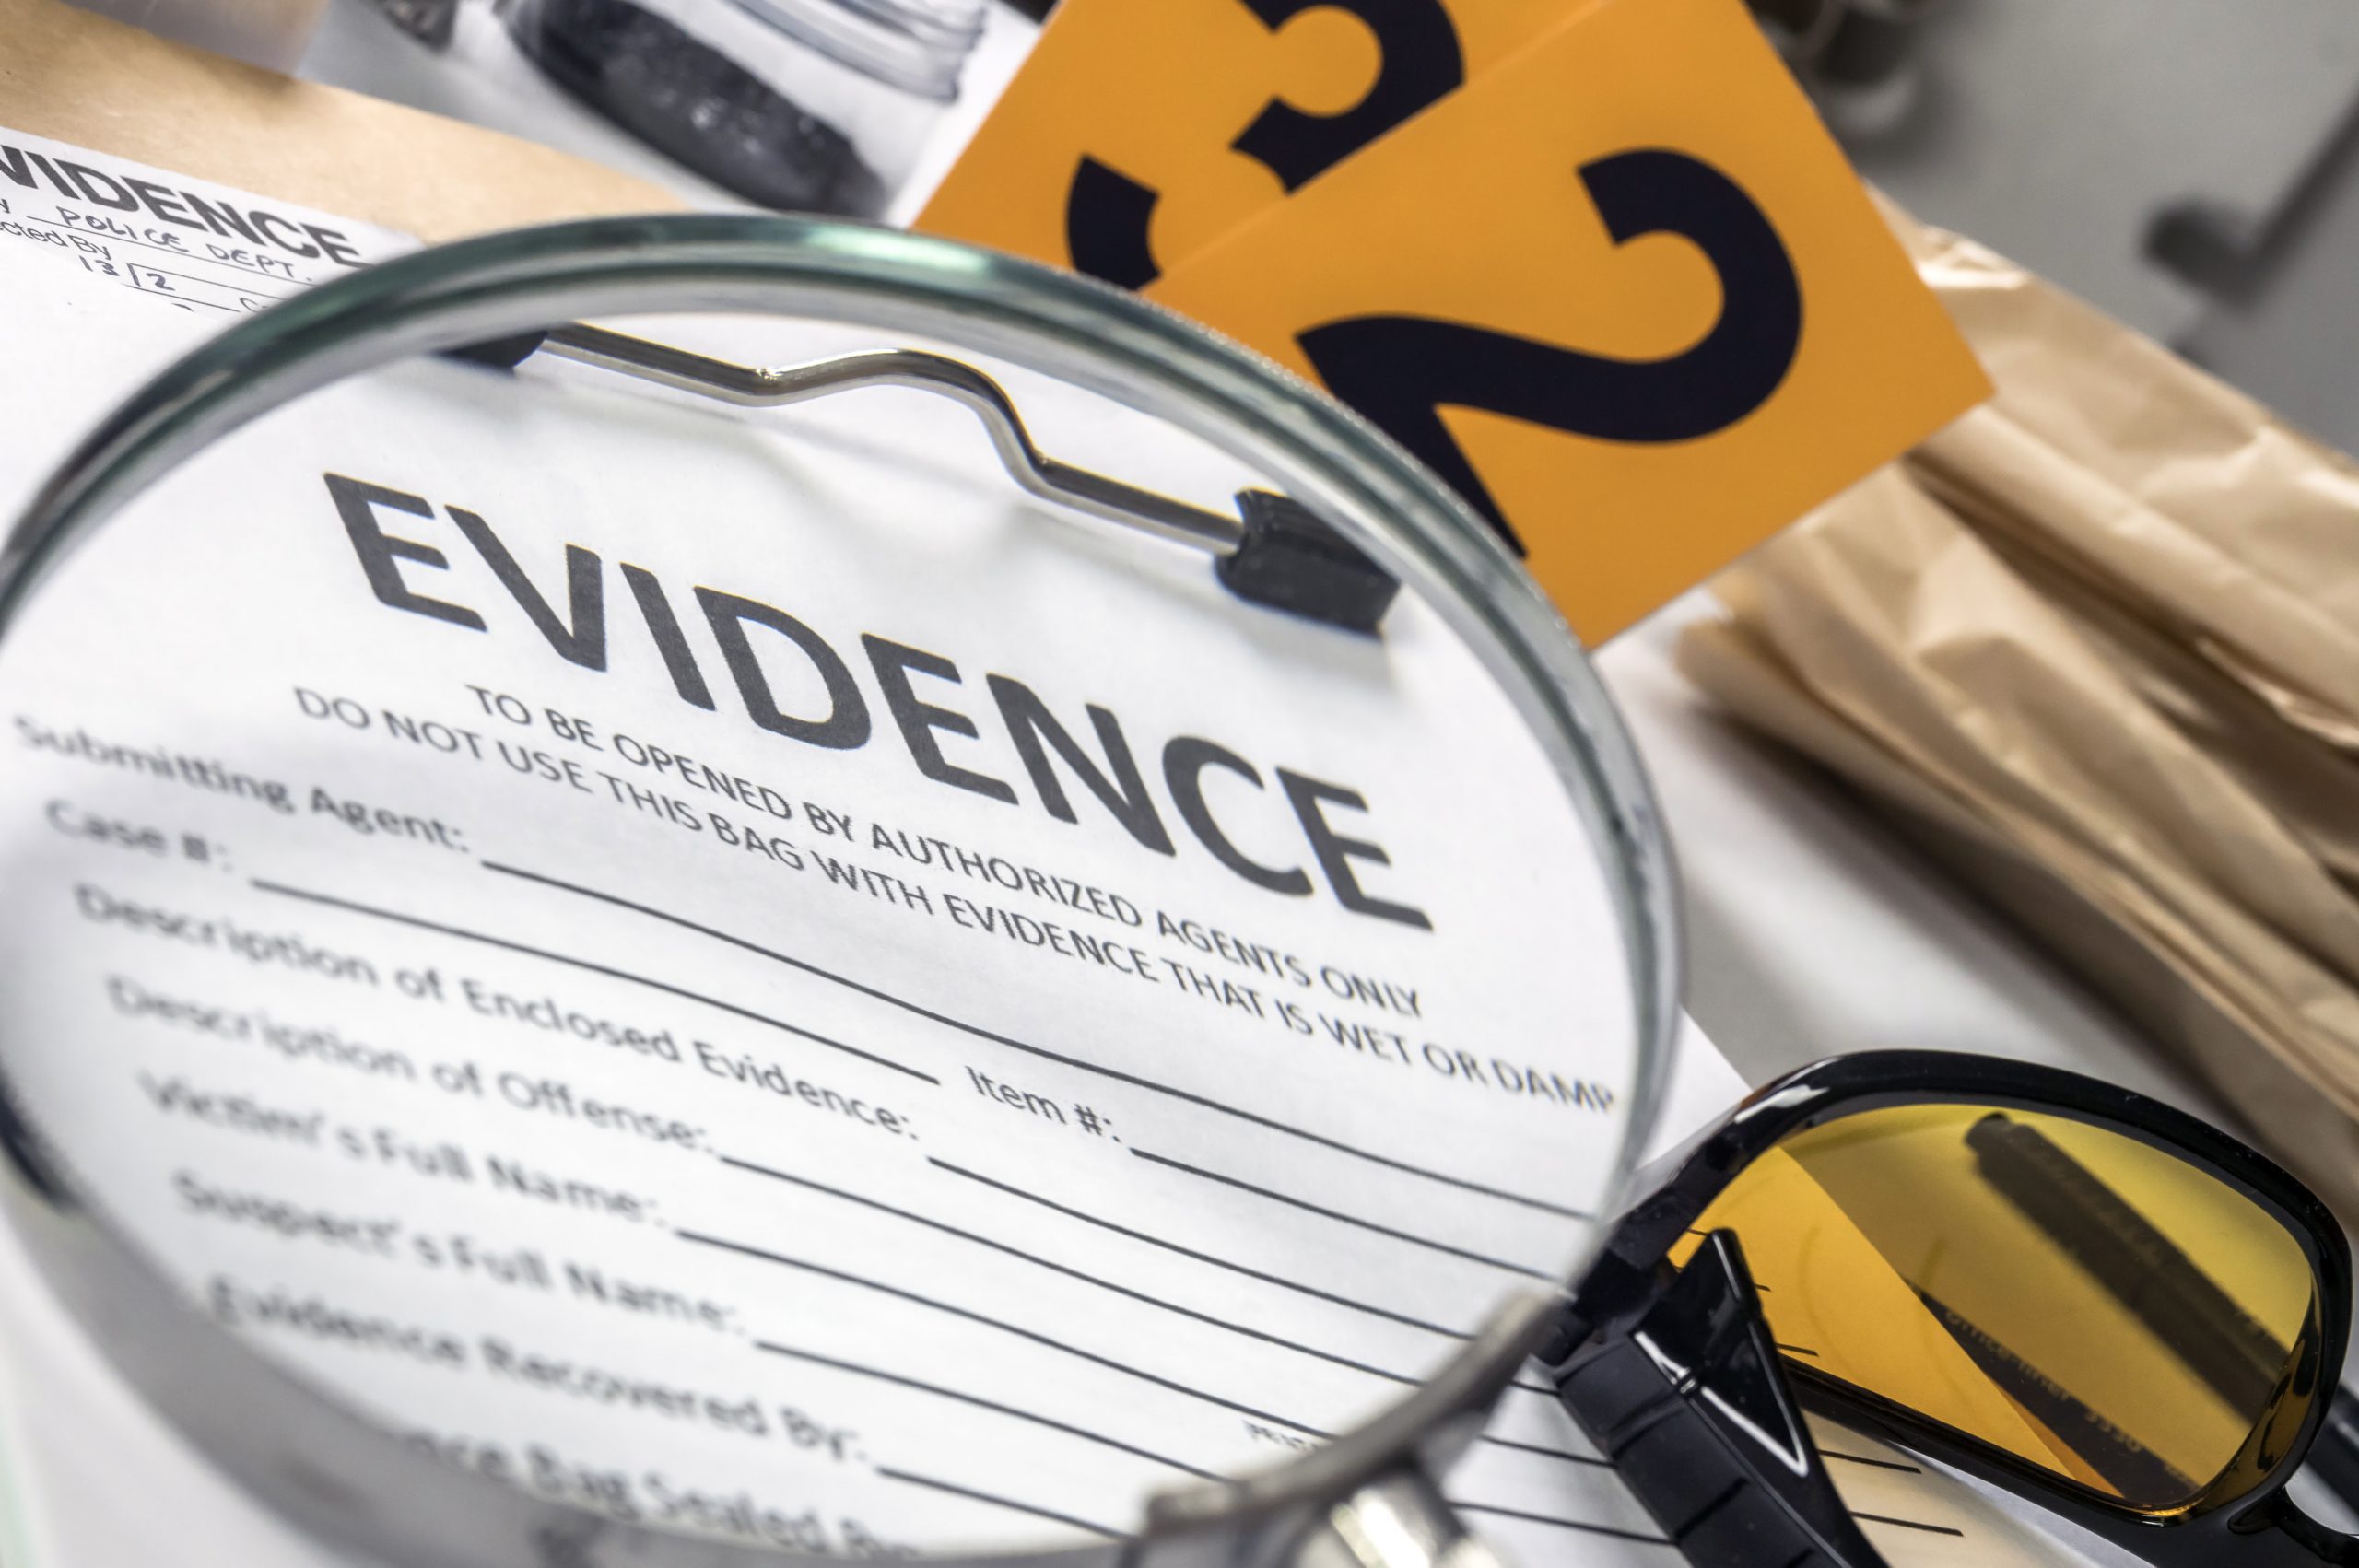 How Do You Present Newly Discovered Evidence to a Court?